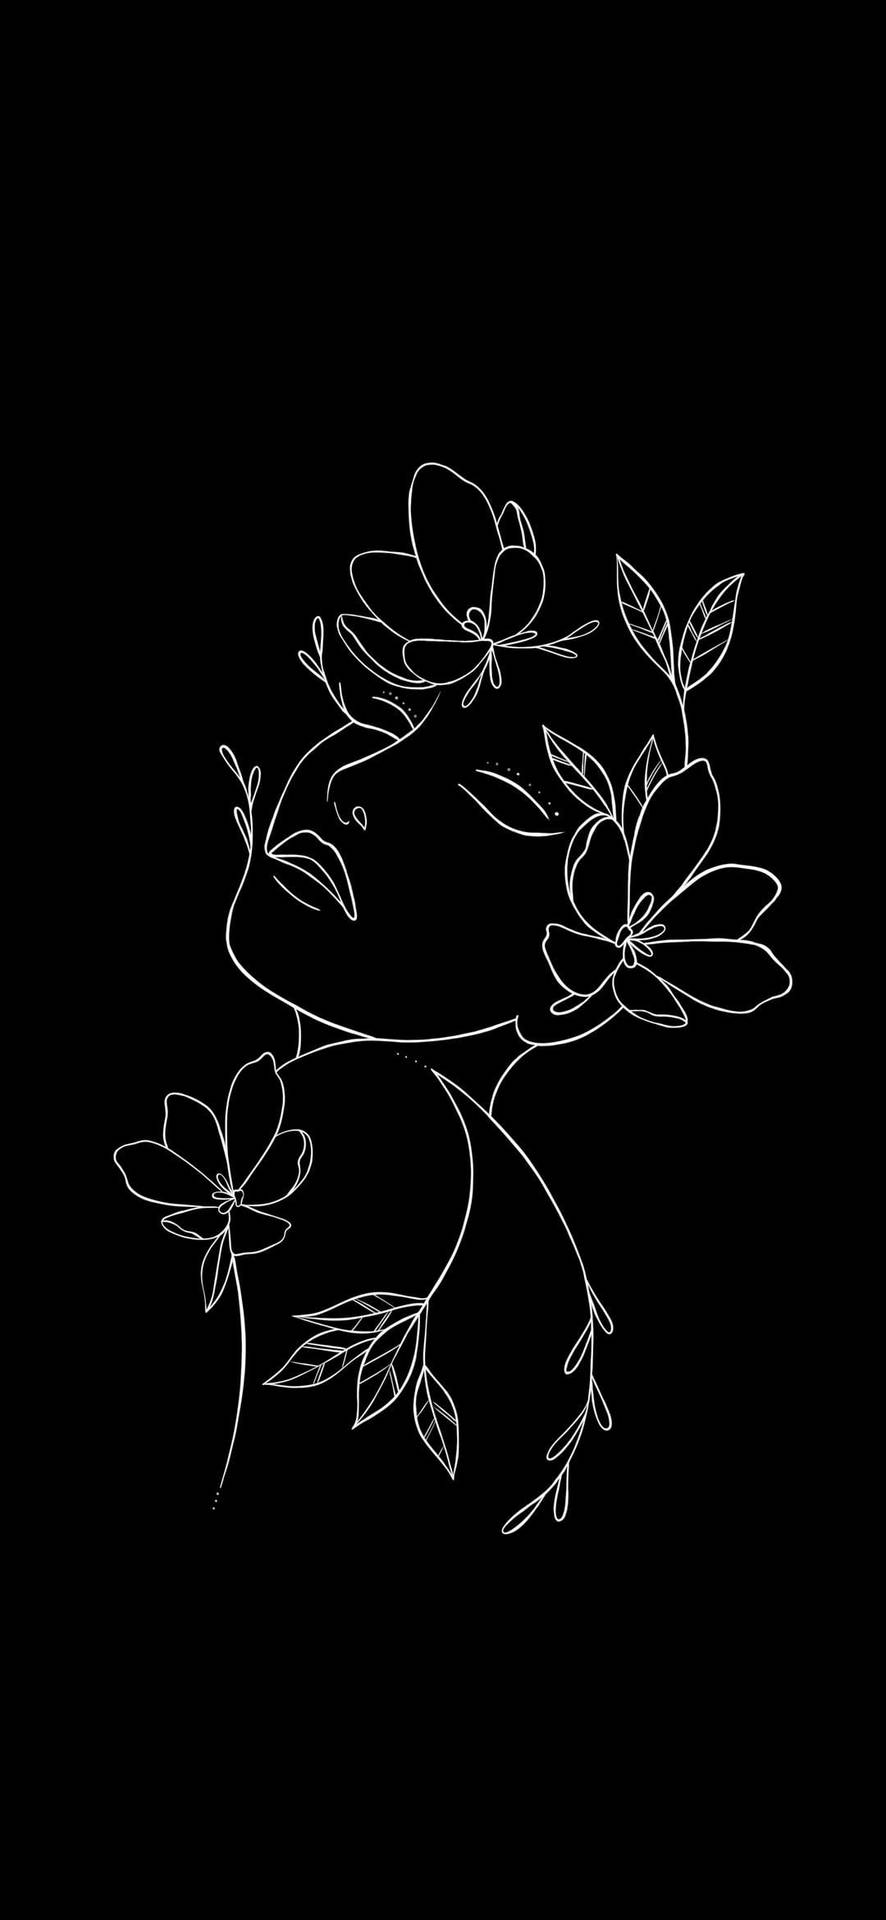 Download Black And White Flower Cute Art Wallpaper 